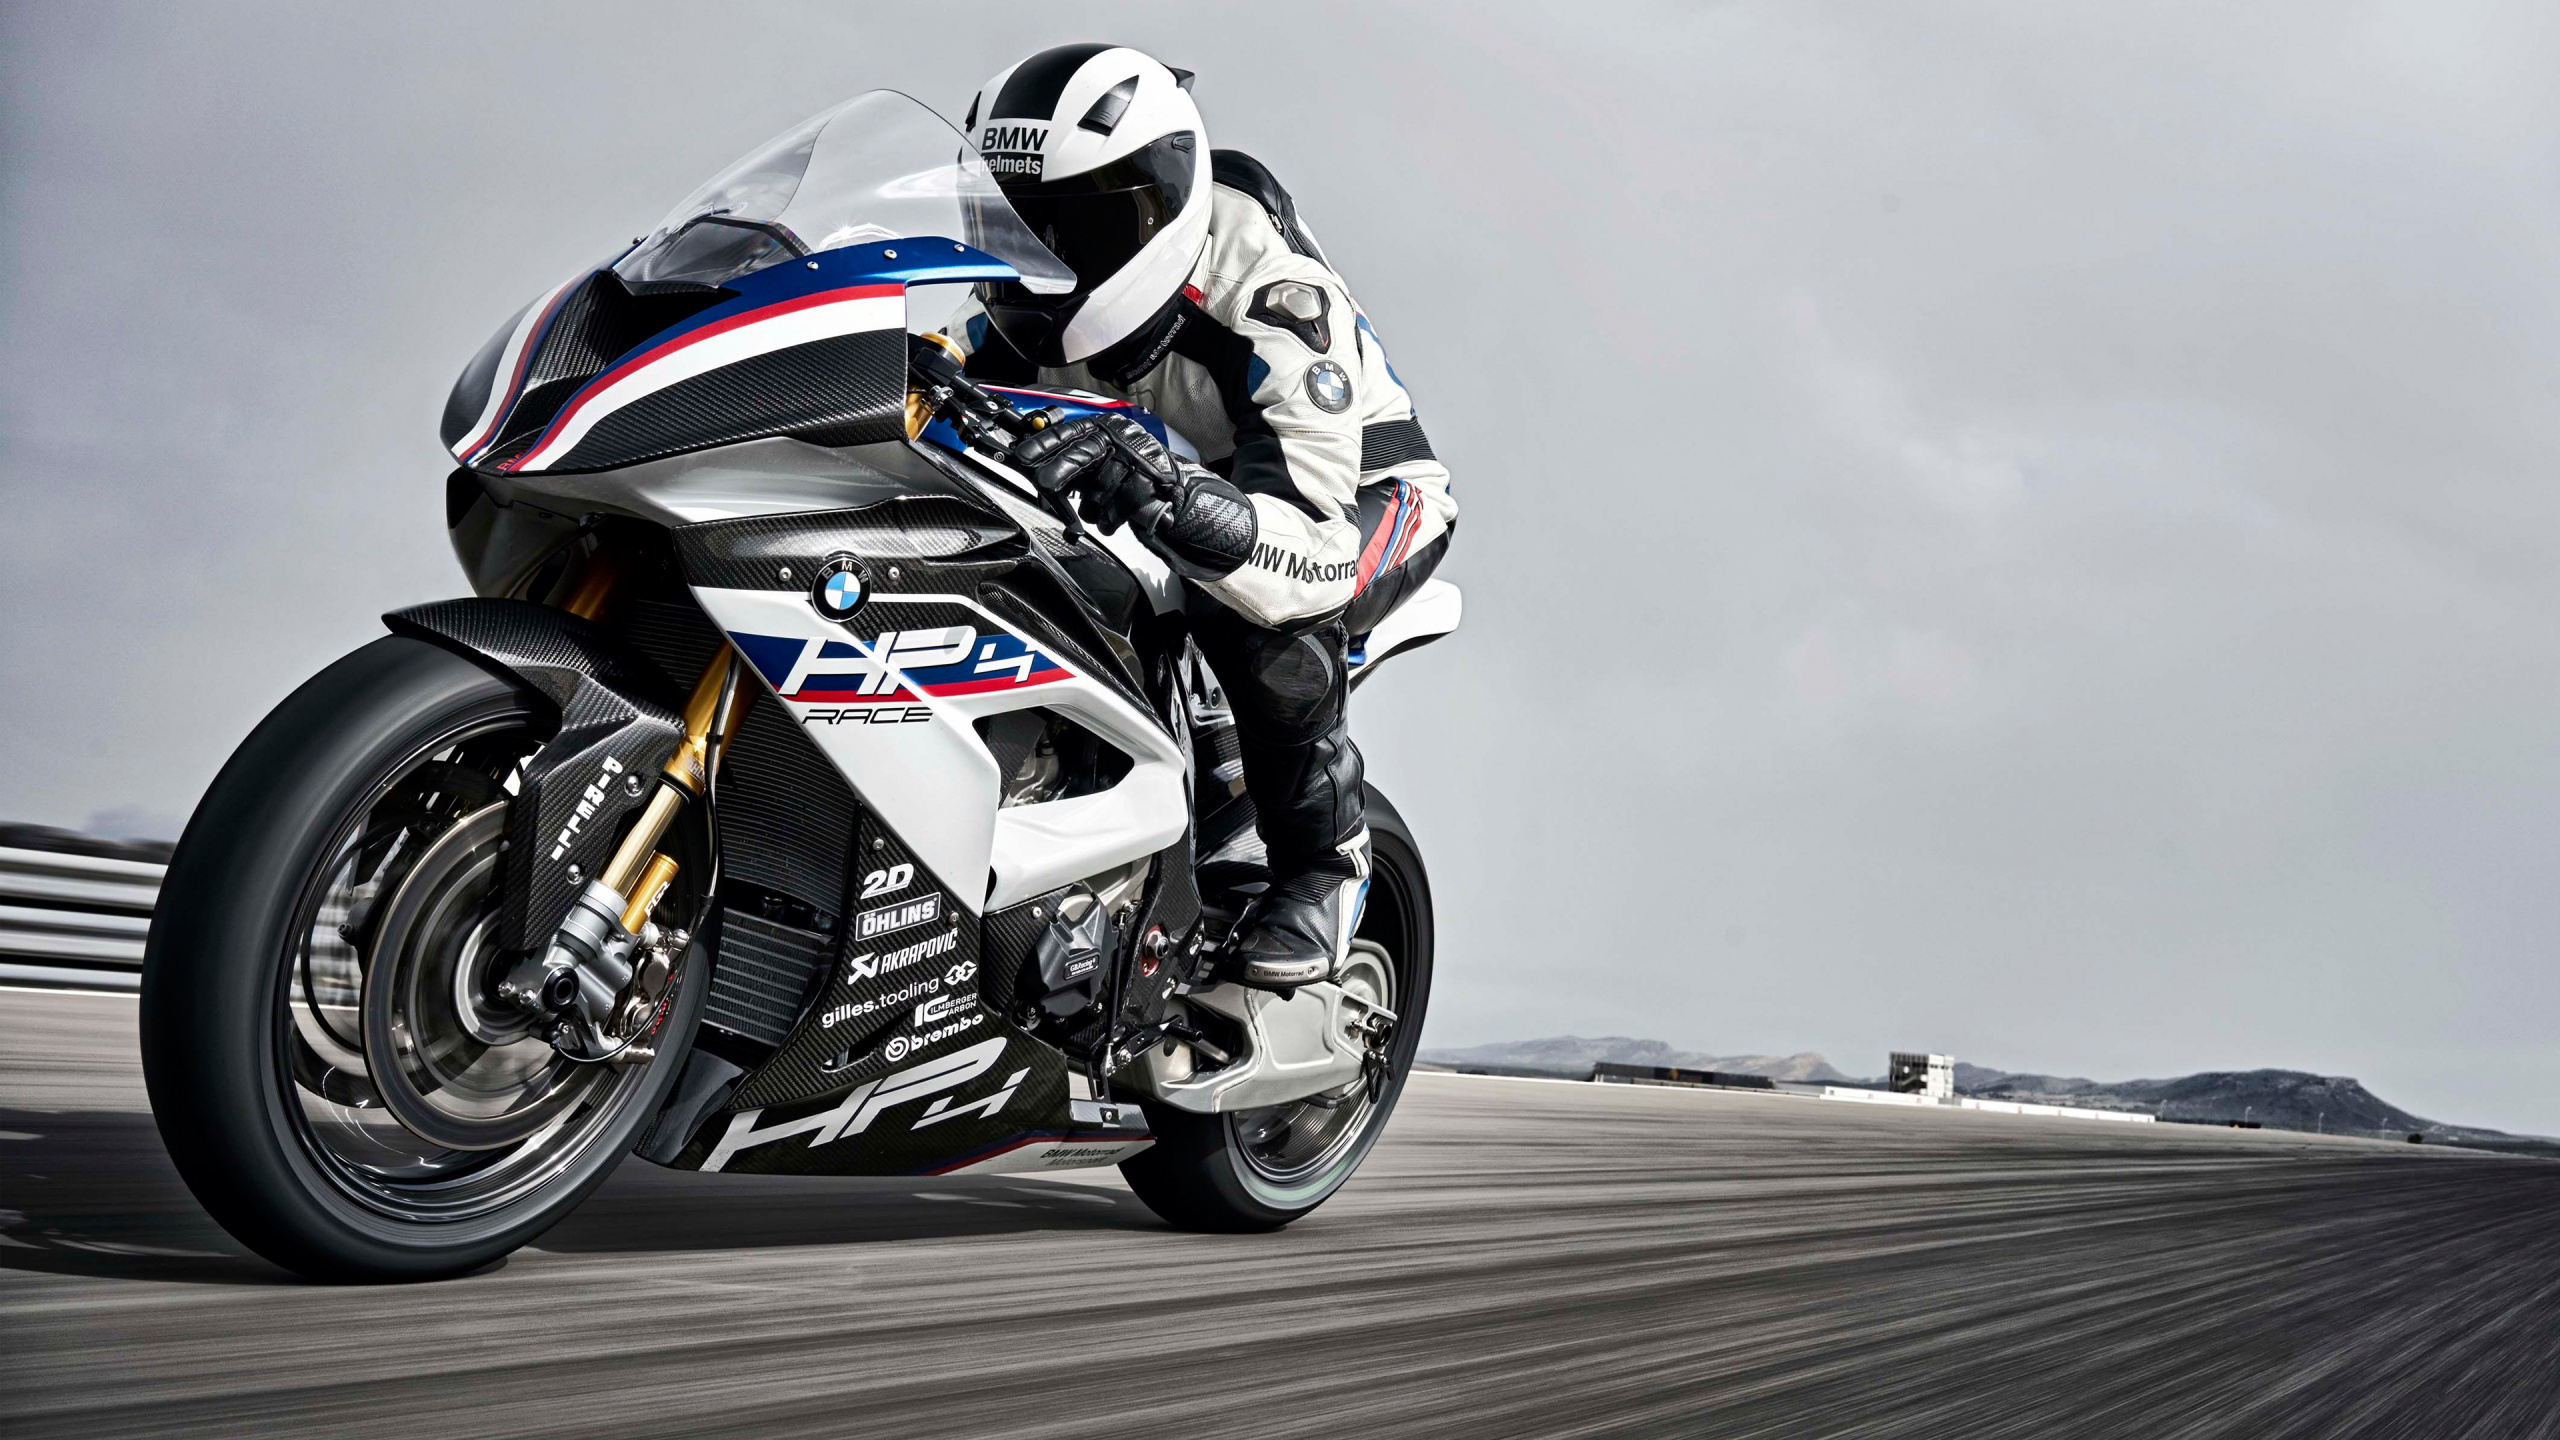 Man in Black and White Motorcycle Suit Riding on Black and White Sports Bike. Wallpaper in 2560x1440 Resolution